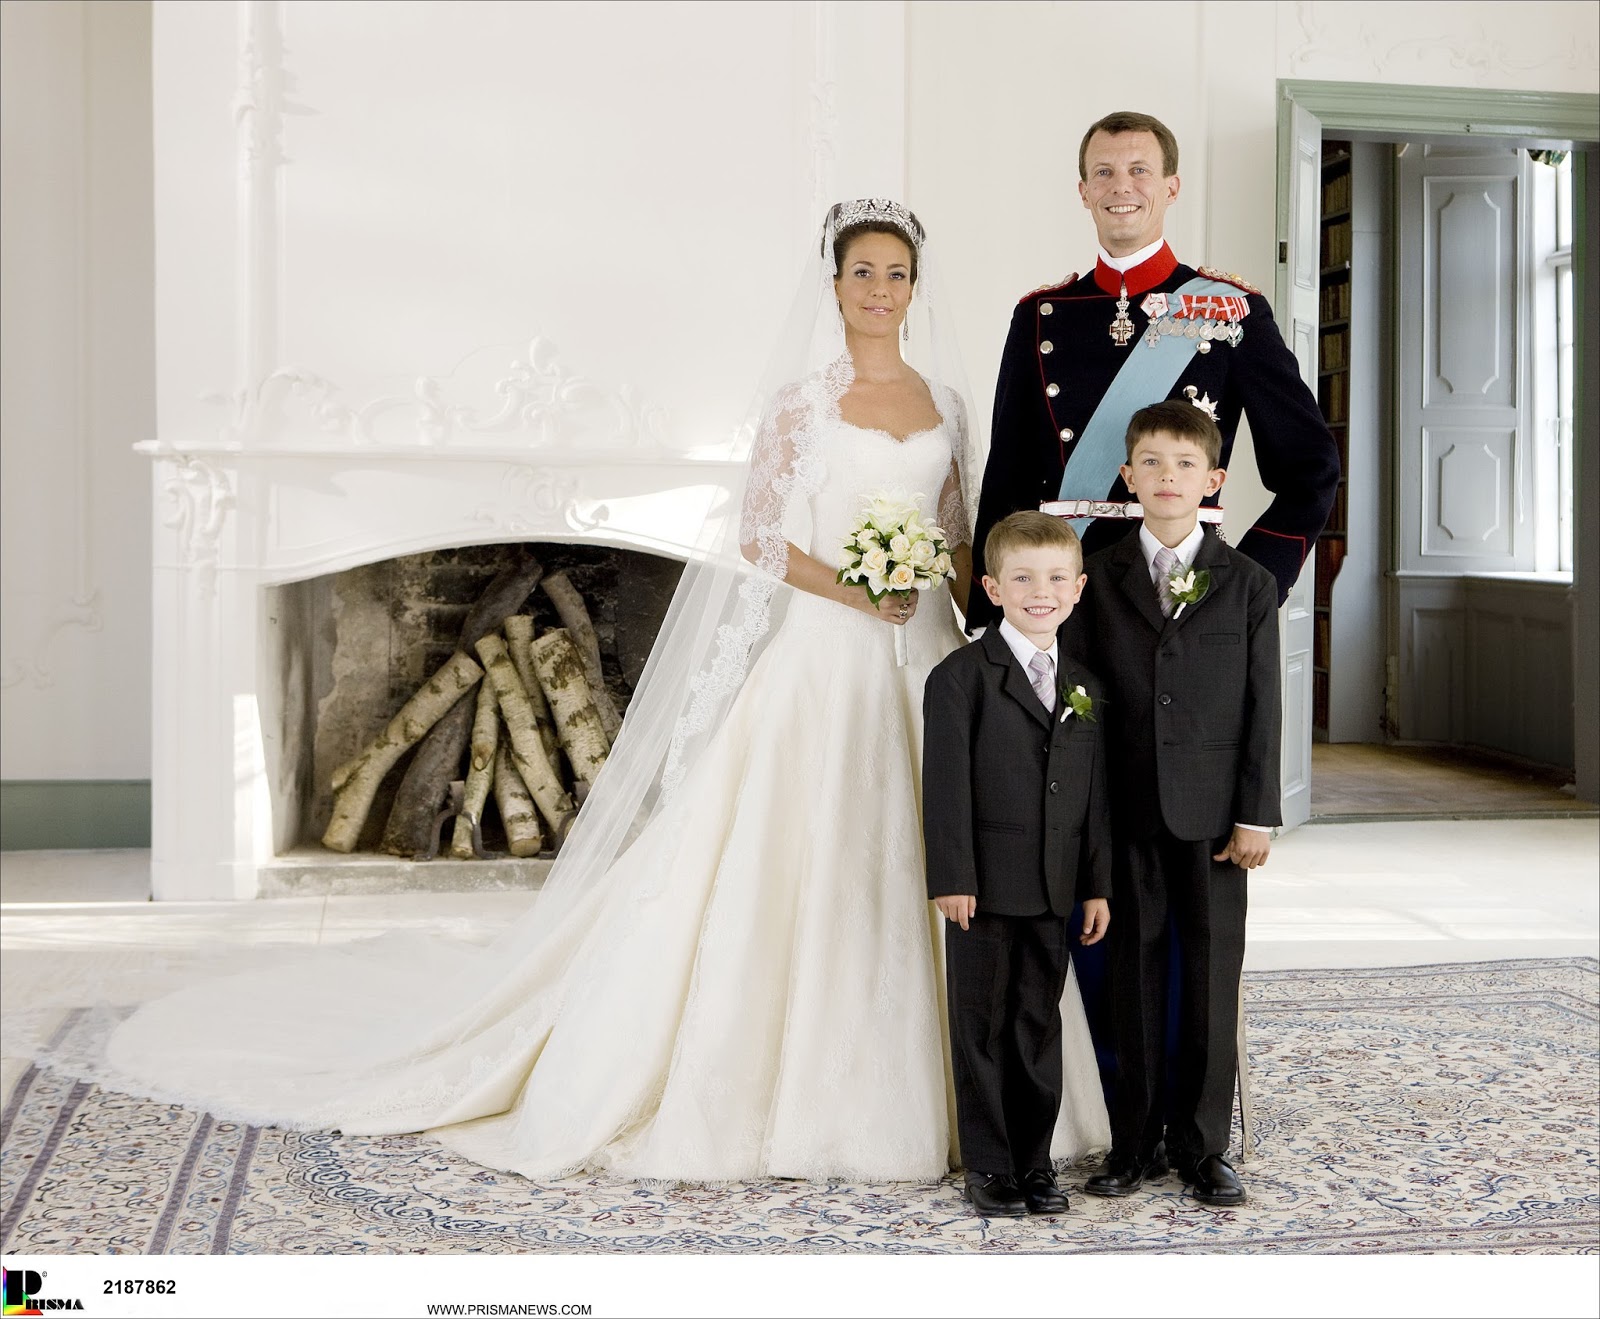 Mary from the start: Wedding of prince Joachim & Marie Cavallier